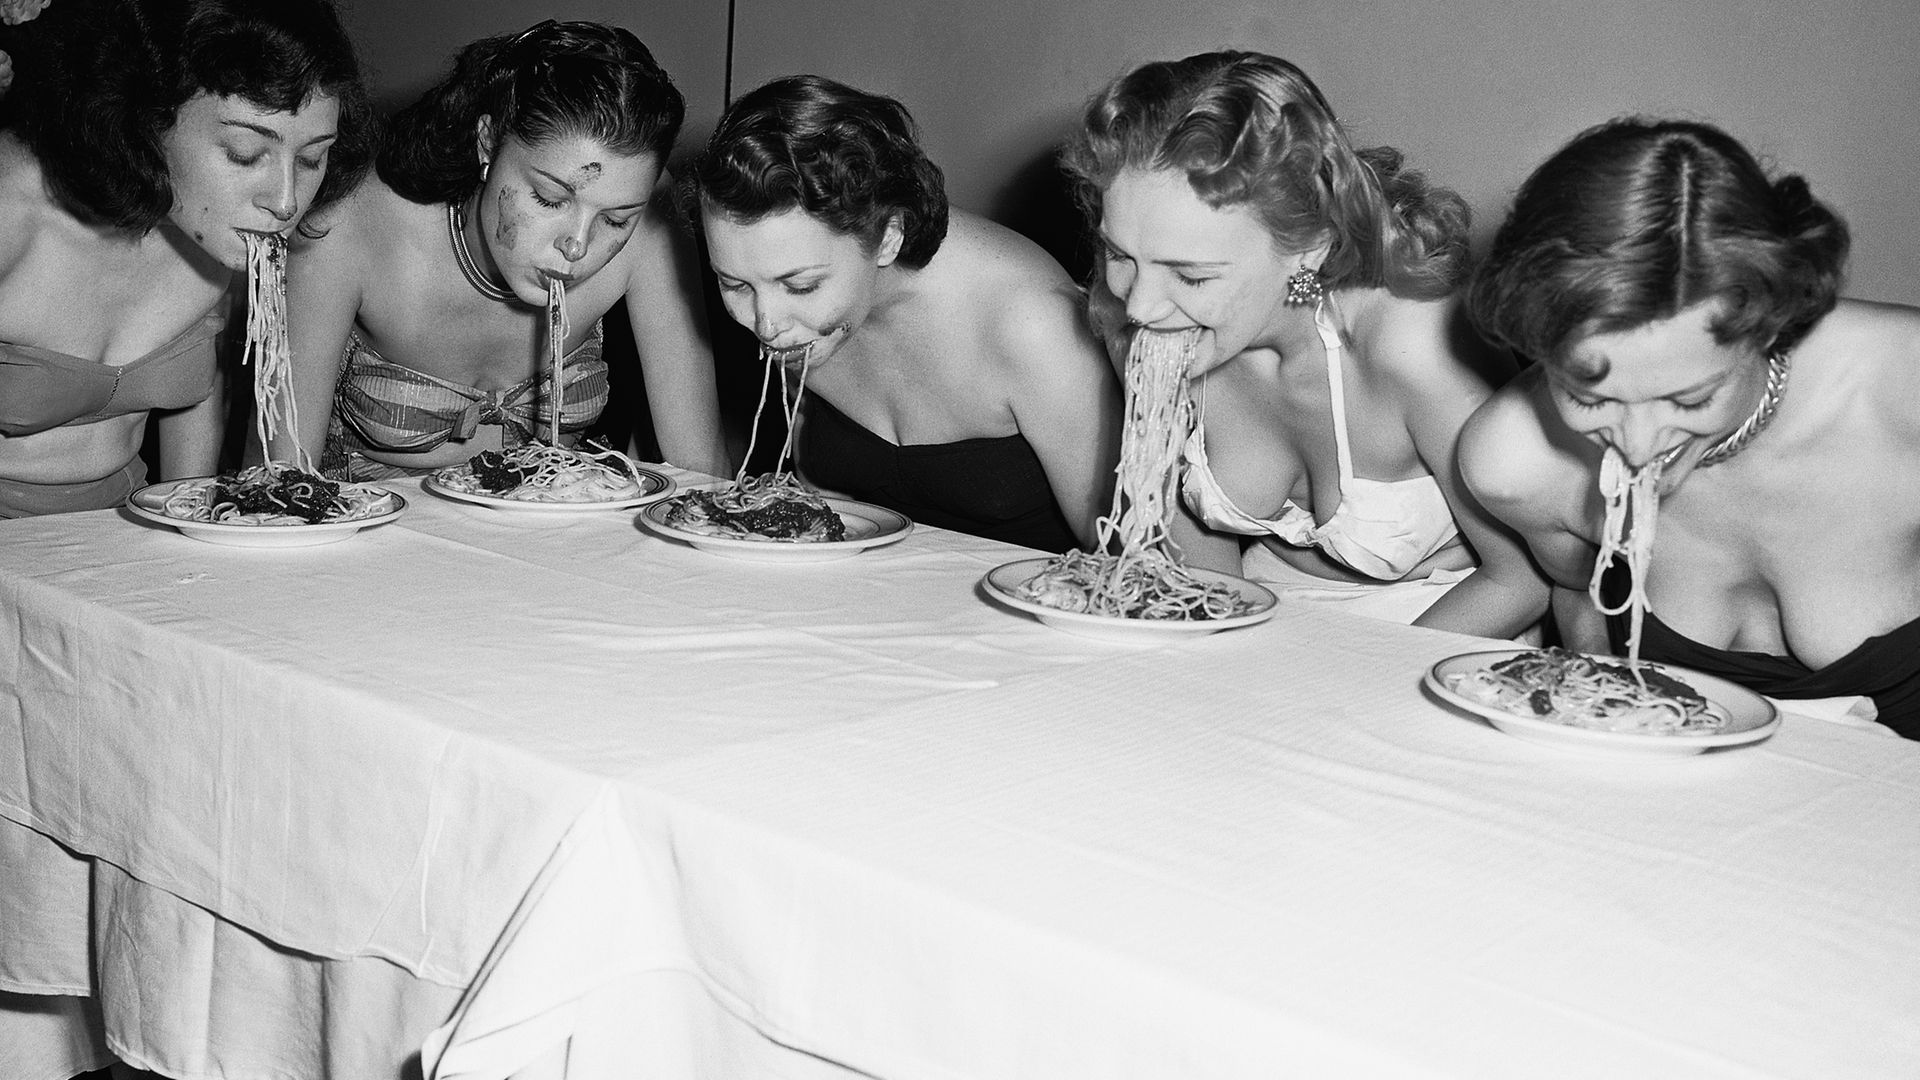 Five Broadway show girls participated in a 'spaghetti swooshing' contest, where they had to eat a plate of spaghetti and sauce without using their hands - Credit: Bettmann Archive